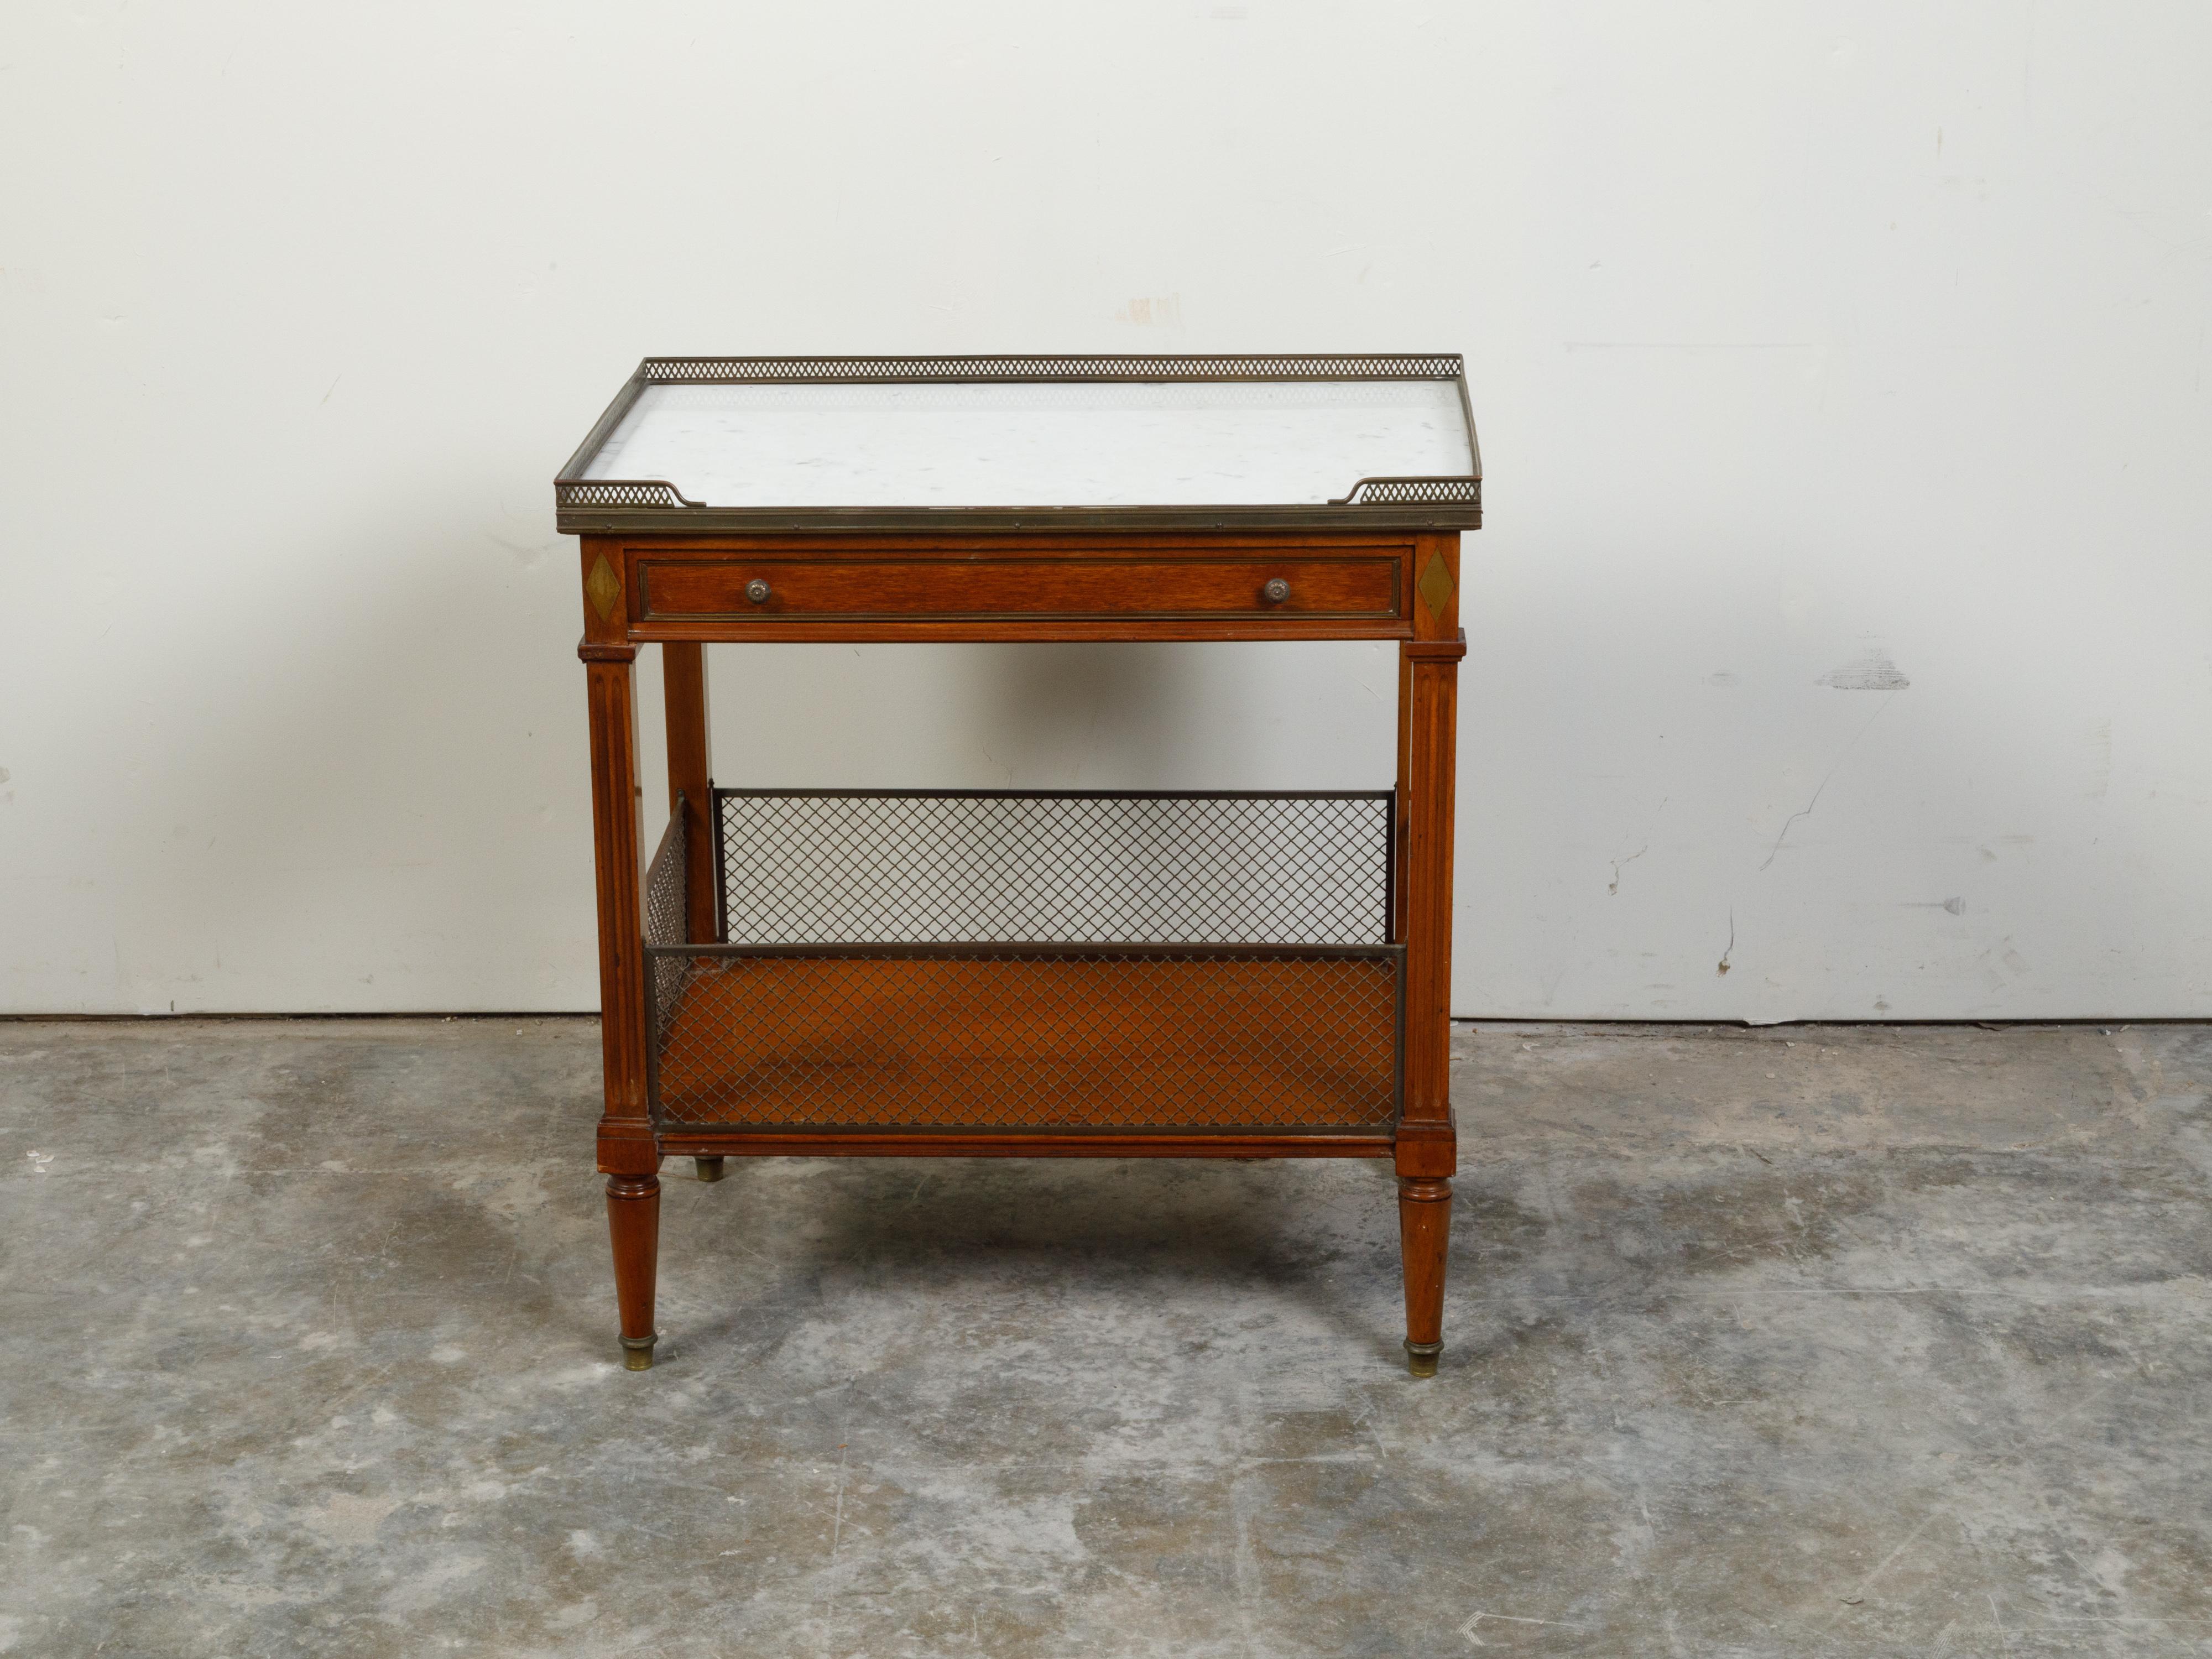 A French walnut console table from the 19th century, with white marble top, brass gallery and single drawer. Created in France during the 19th century, this console table features a rectangular white marble top with pierced three-quarter brass